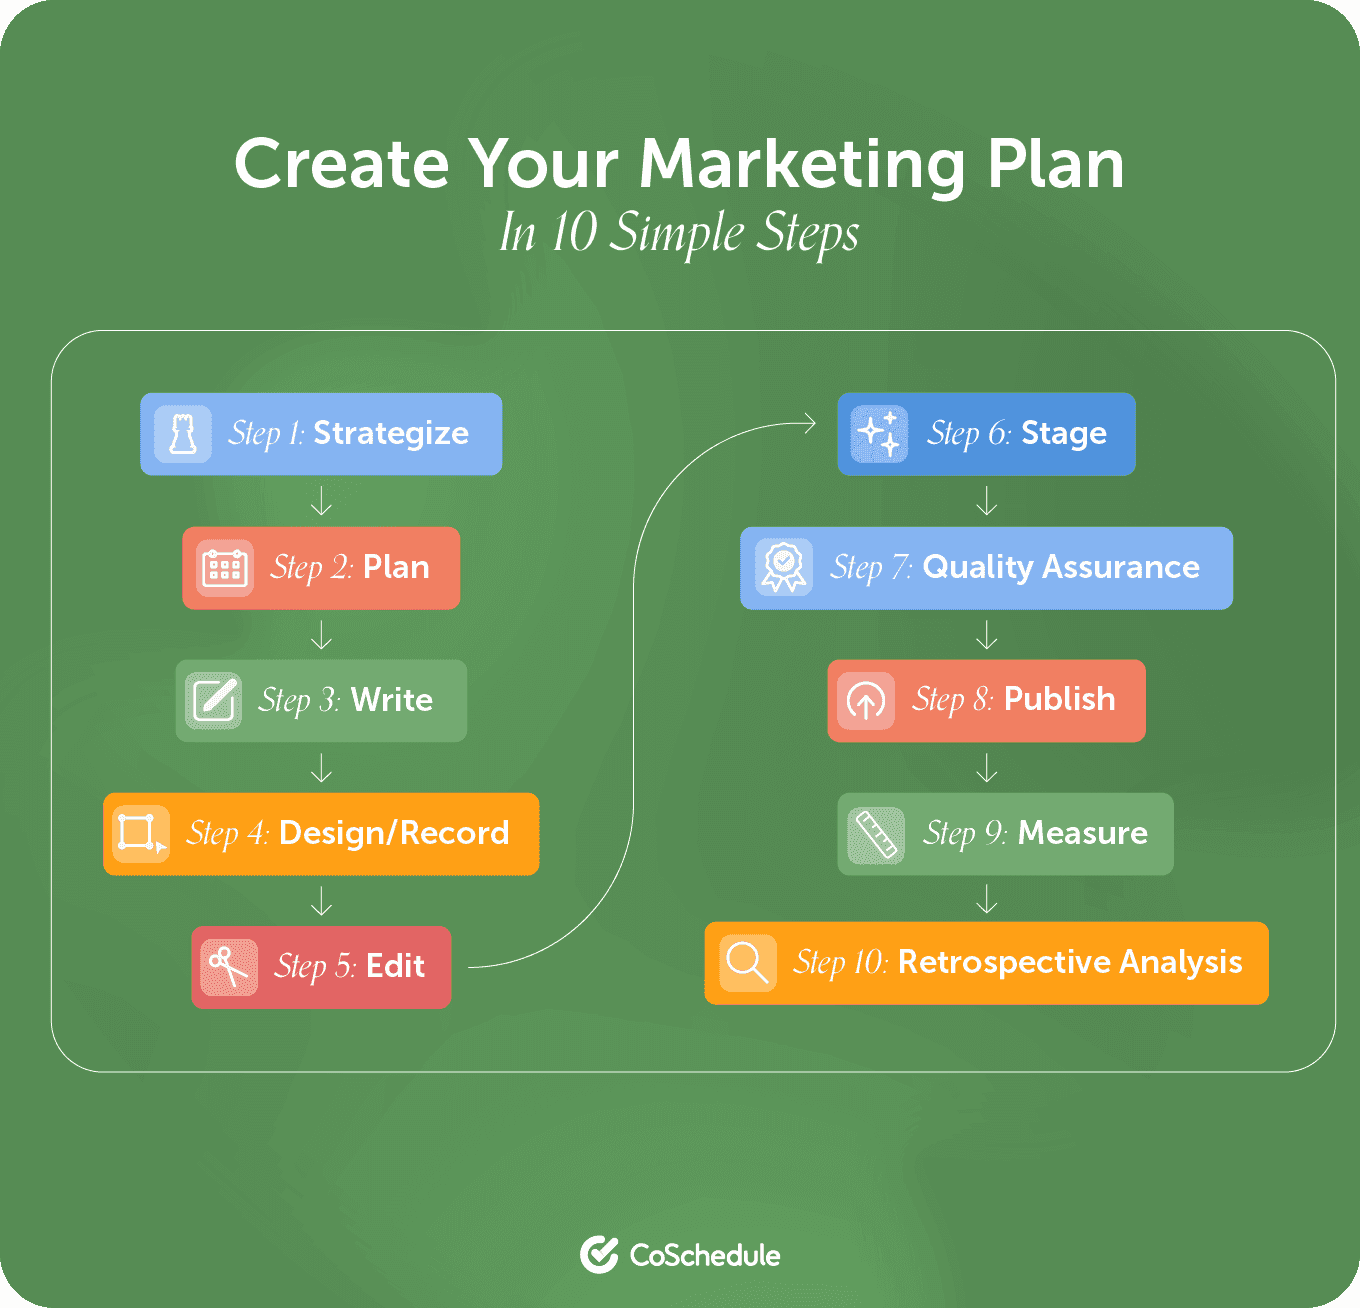 CoSchedules ten simple steps on how to create your Marketing plan which are strategize, plan, write, design/record, edit, stage, quality assurance, publish, measure, and retrospective analysis. 